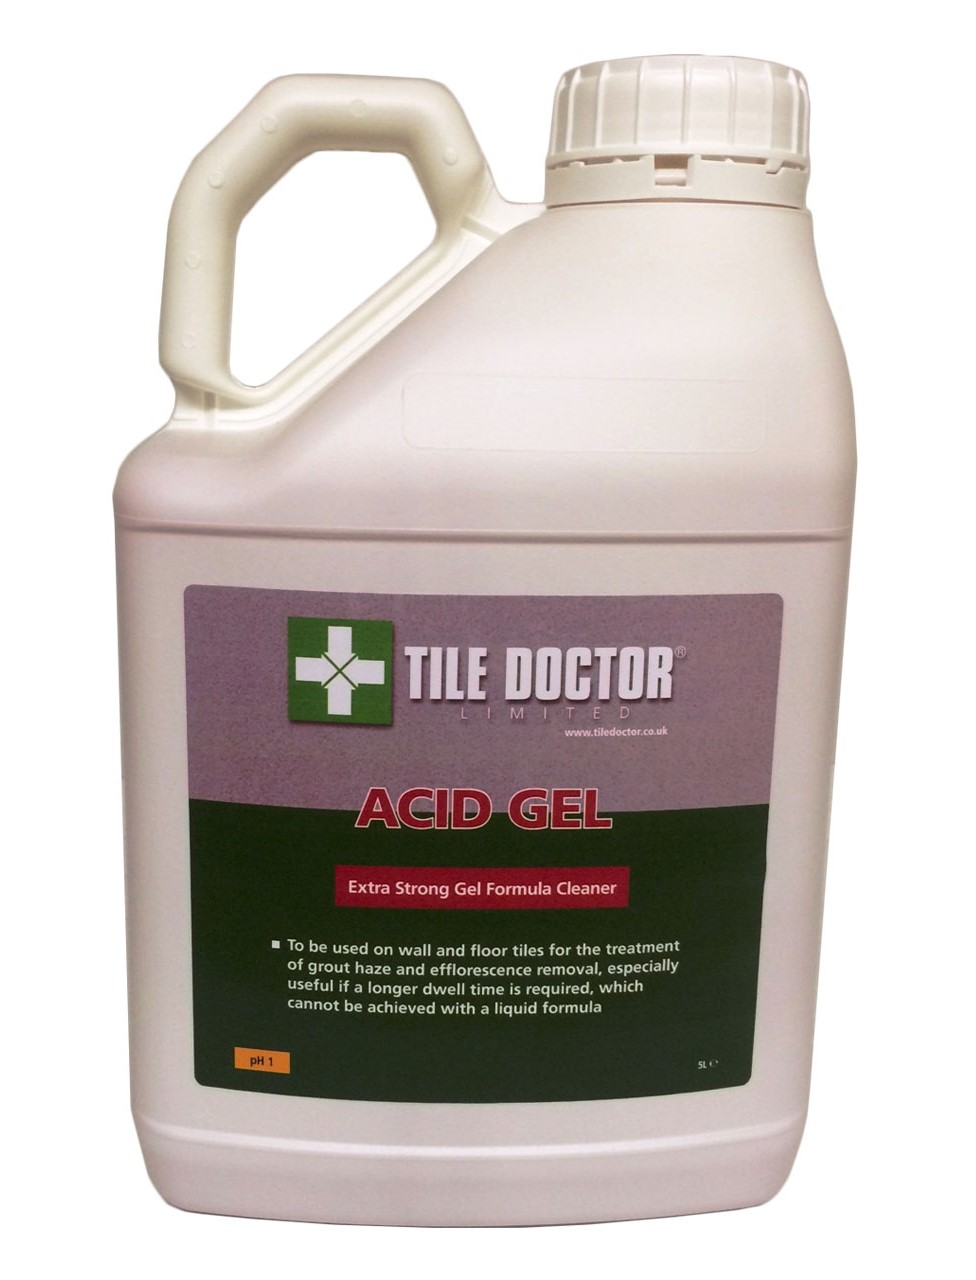 Tile Doctor Acid Gel for the removal of Grout Haze from Wall Tiles